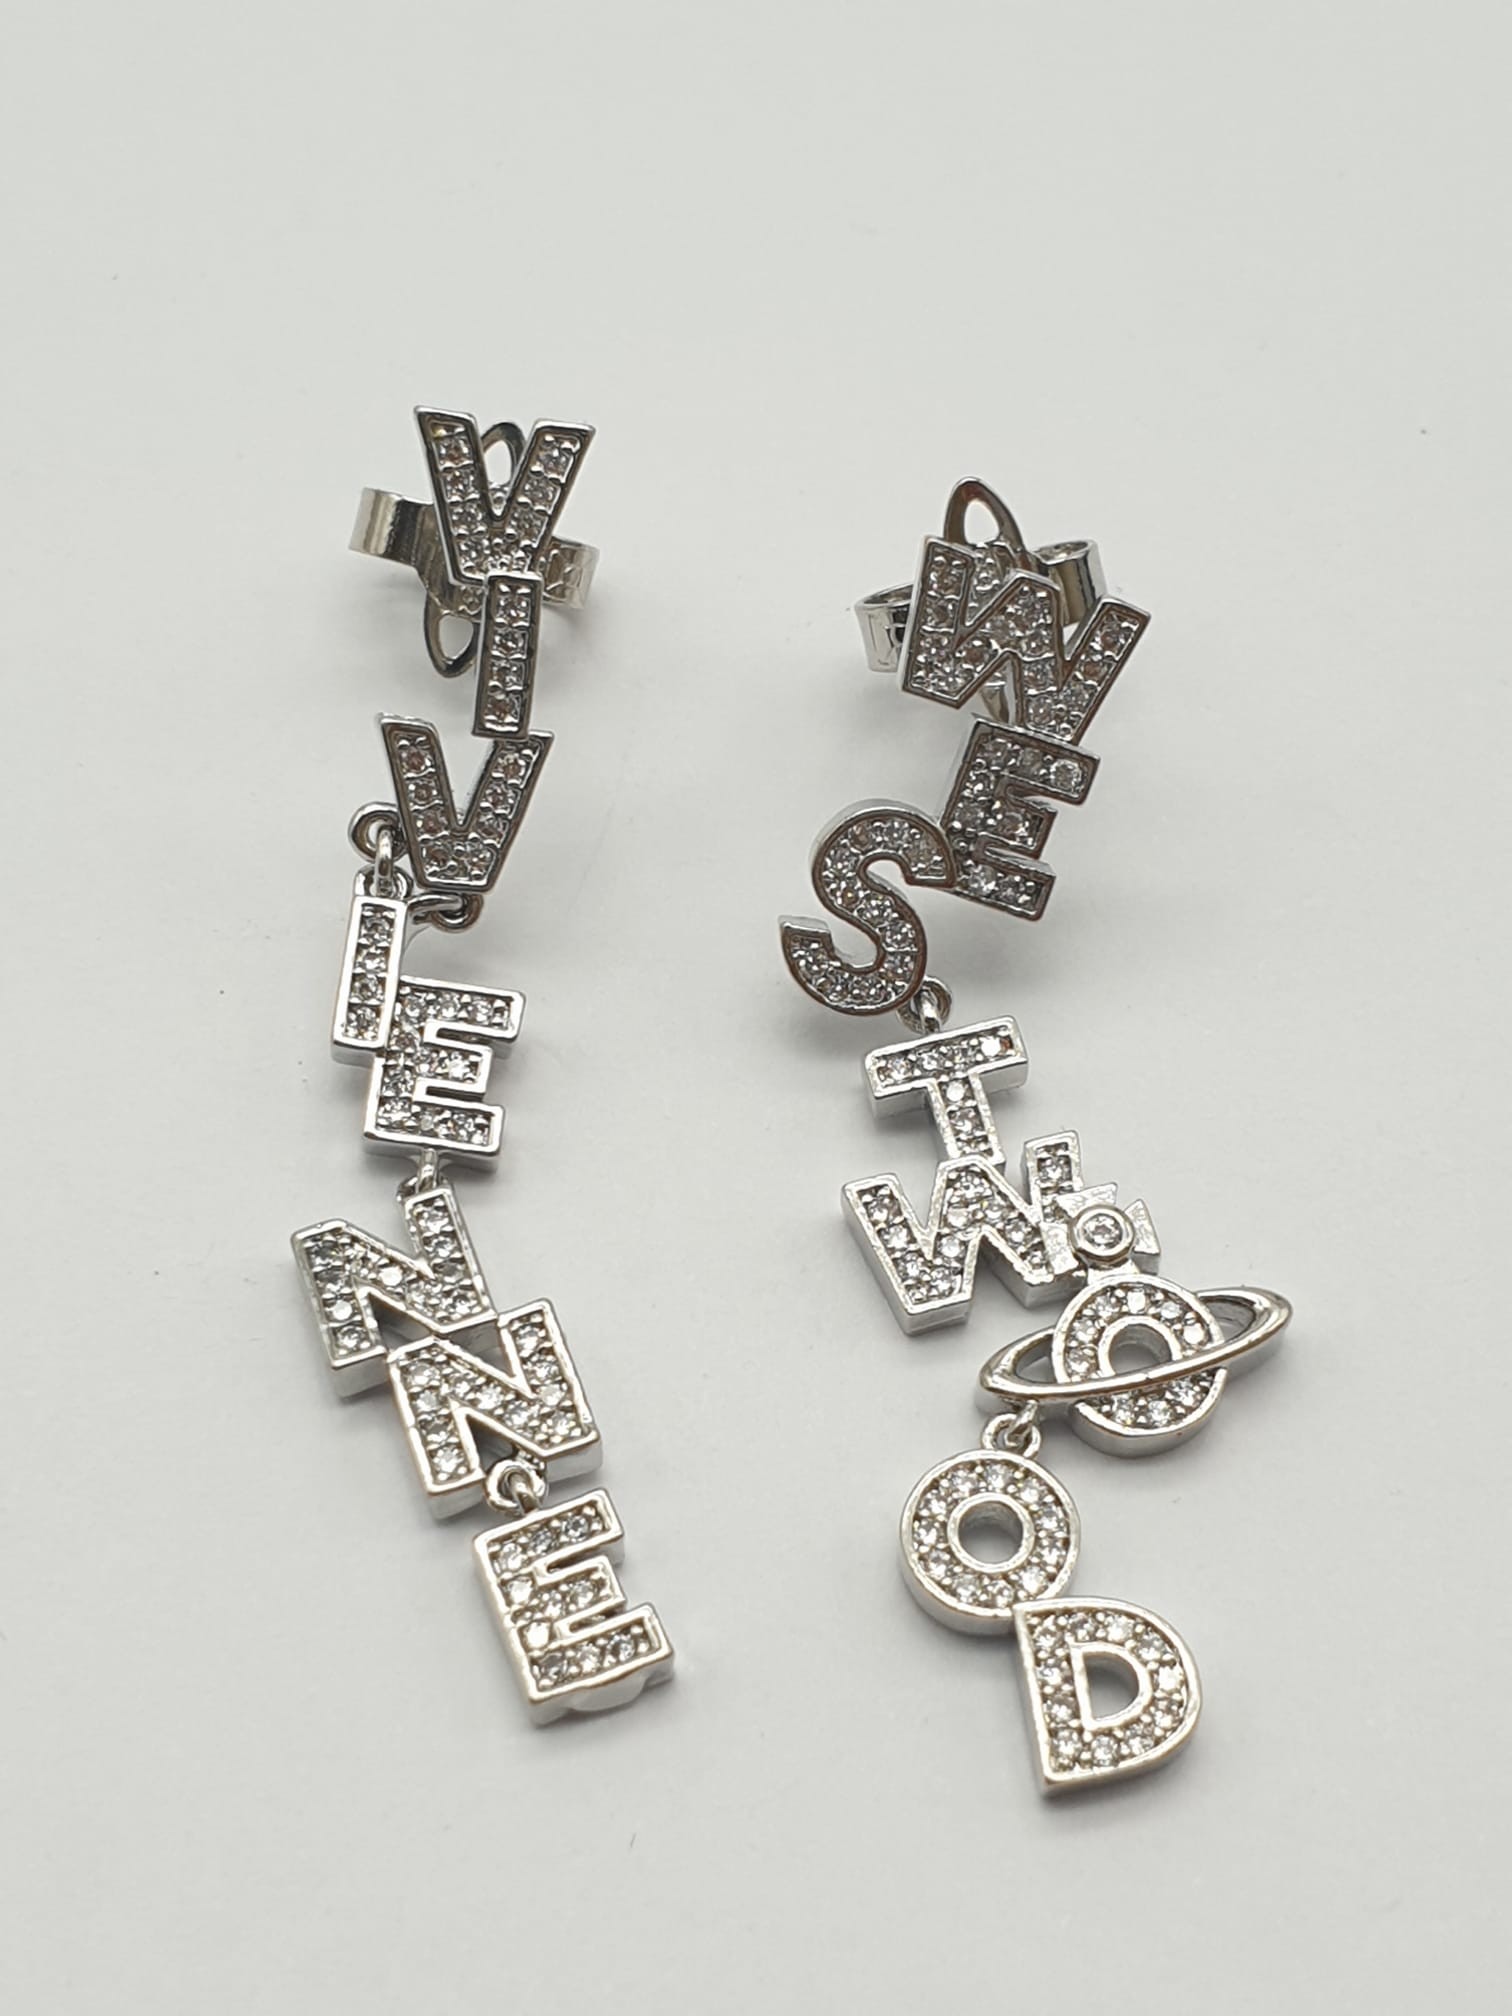 A pair of designer earrings by the iconic British designer Vivienne Westwood. Cast in silver tone